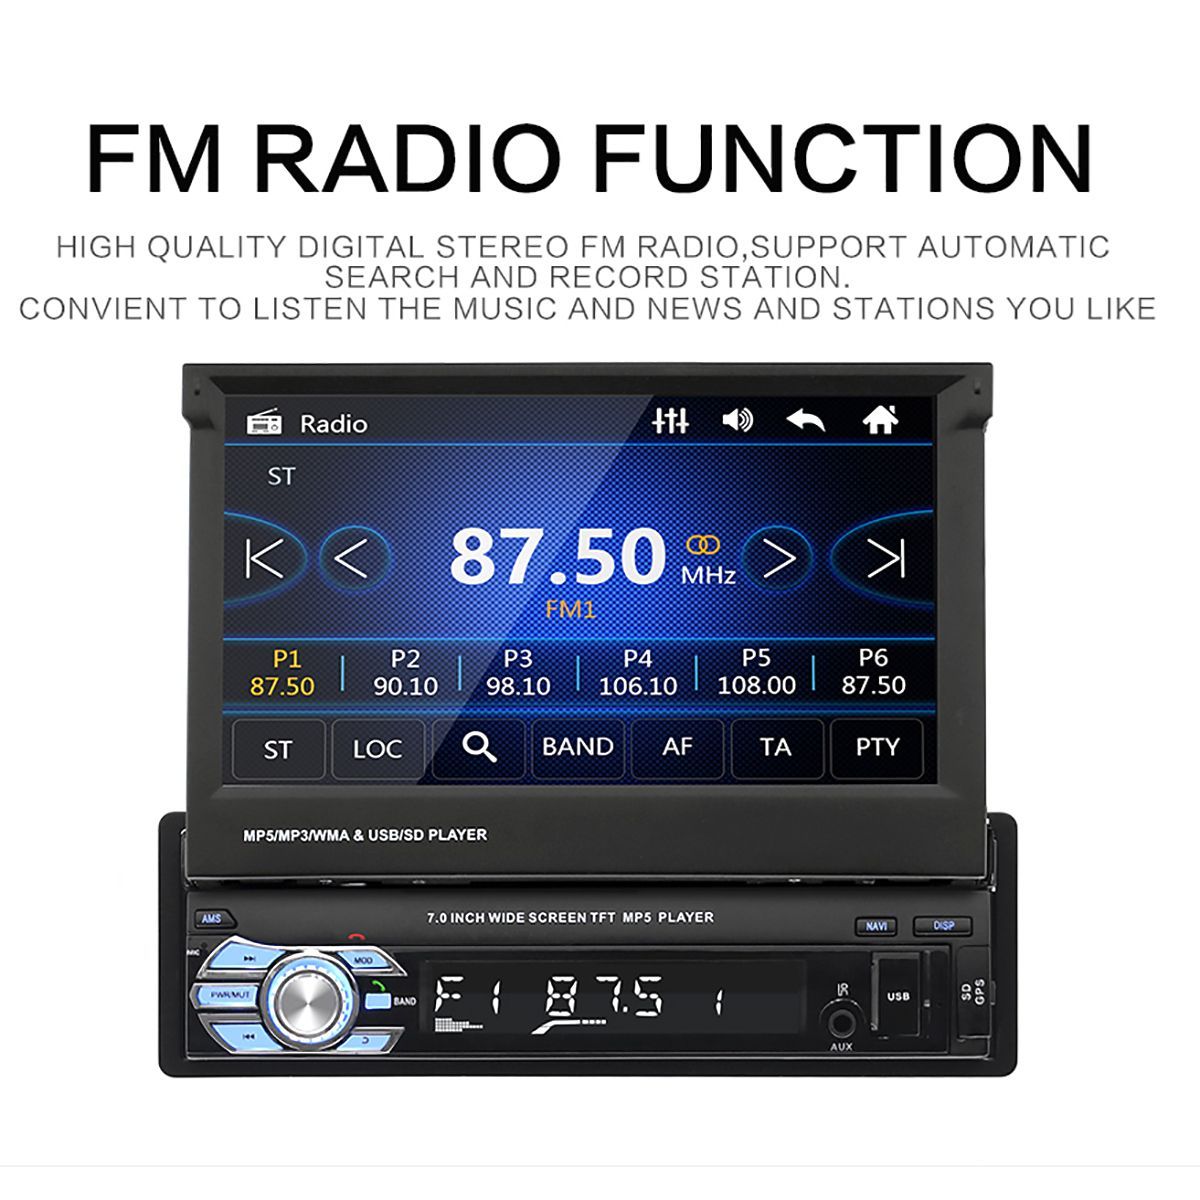 9602G-7-Inch-Single-1DIN-Car-MP5-Player-bluetooth-Retractable-Stereo-Radio-USB-AUX-FM-RDS-With-Backu-1721366